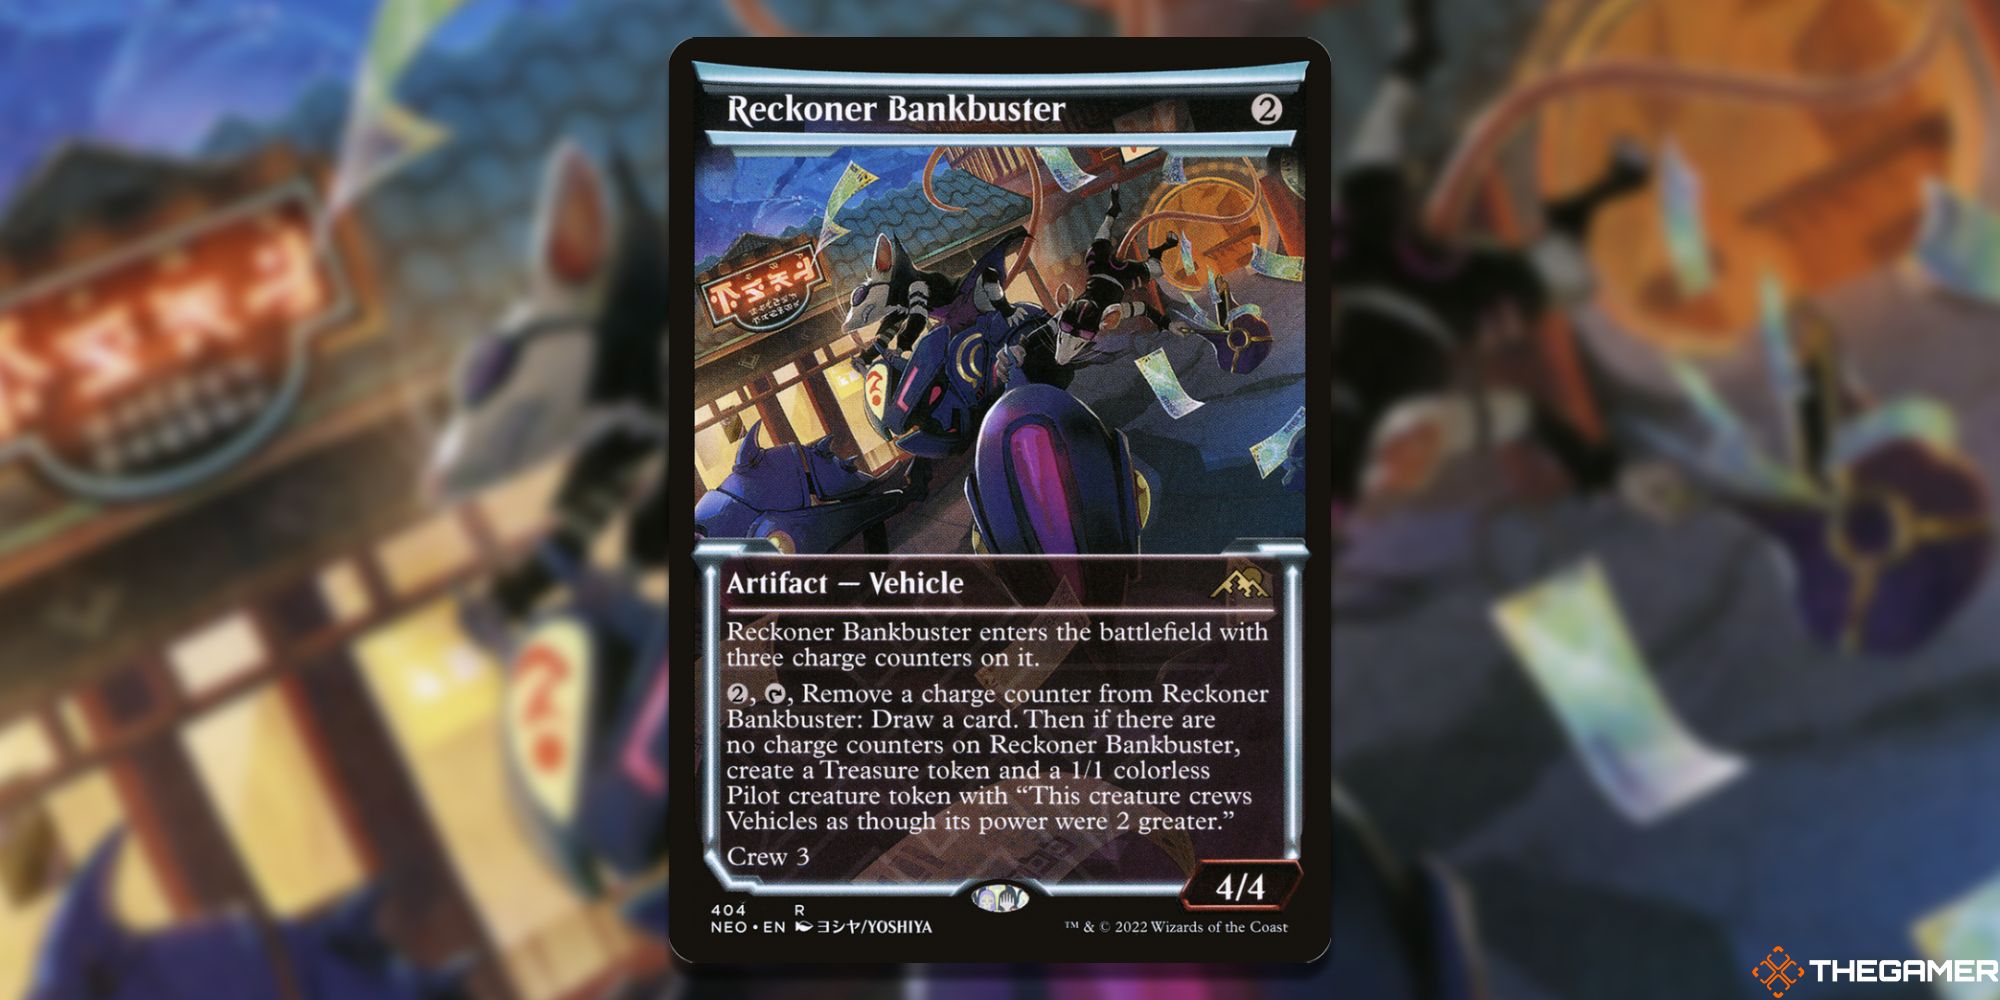 Image of the Reckoner Bankbuster card in Magic: The Gathering, with art by YOSHIYA